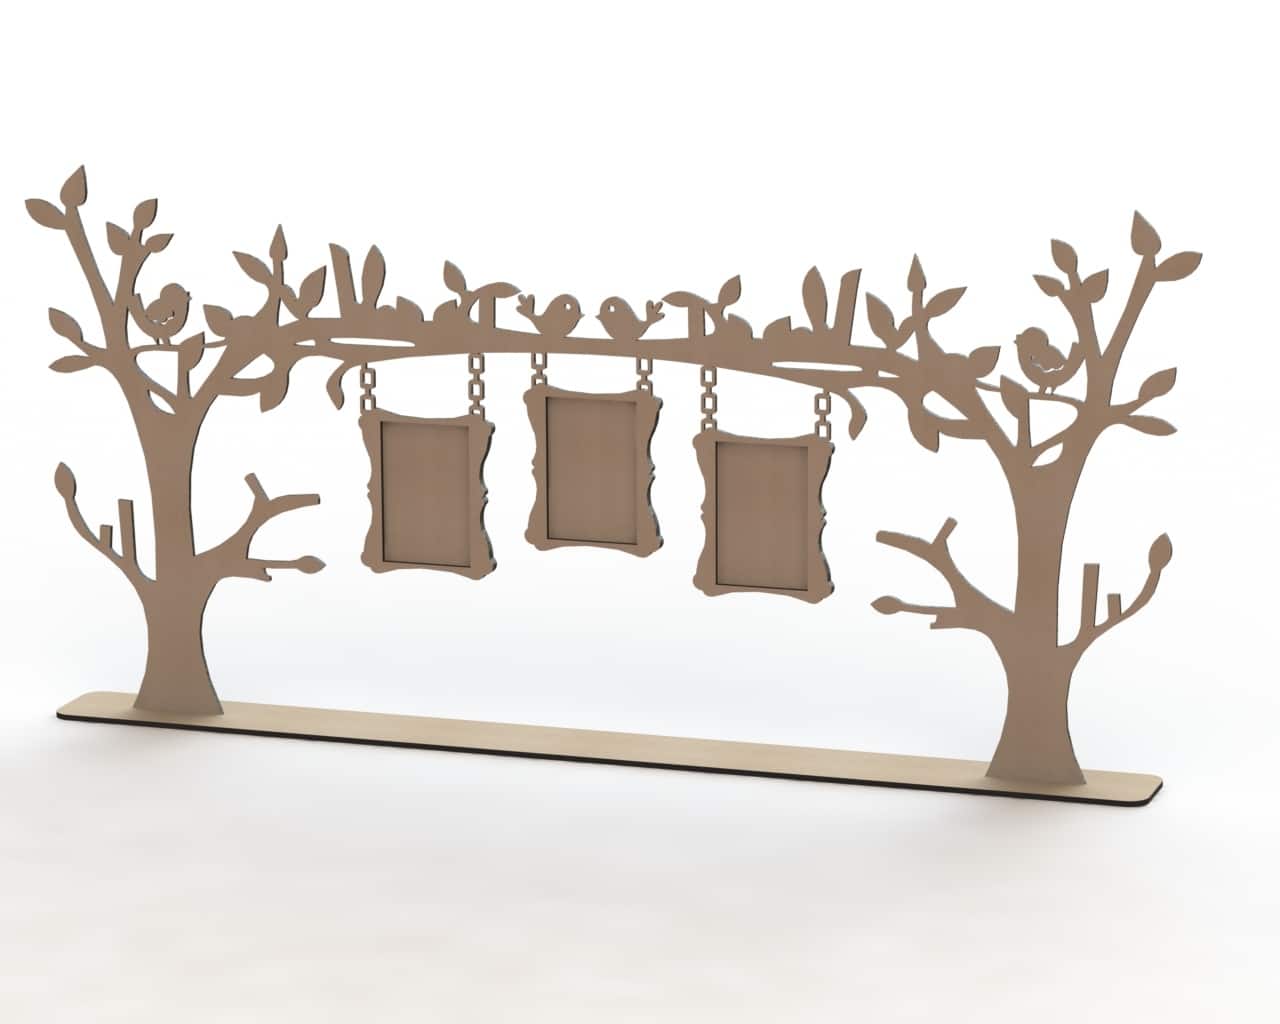 Laser Cut Tree Hanging Family Photo Frame, Wooden Tree Picture Frame Vector File